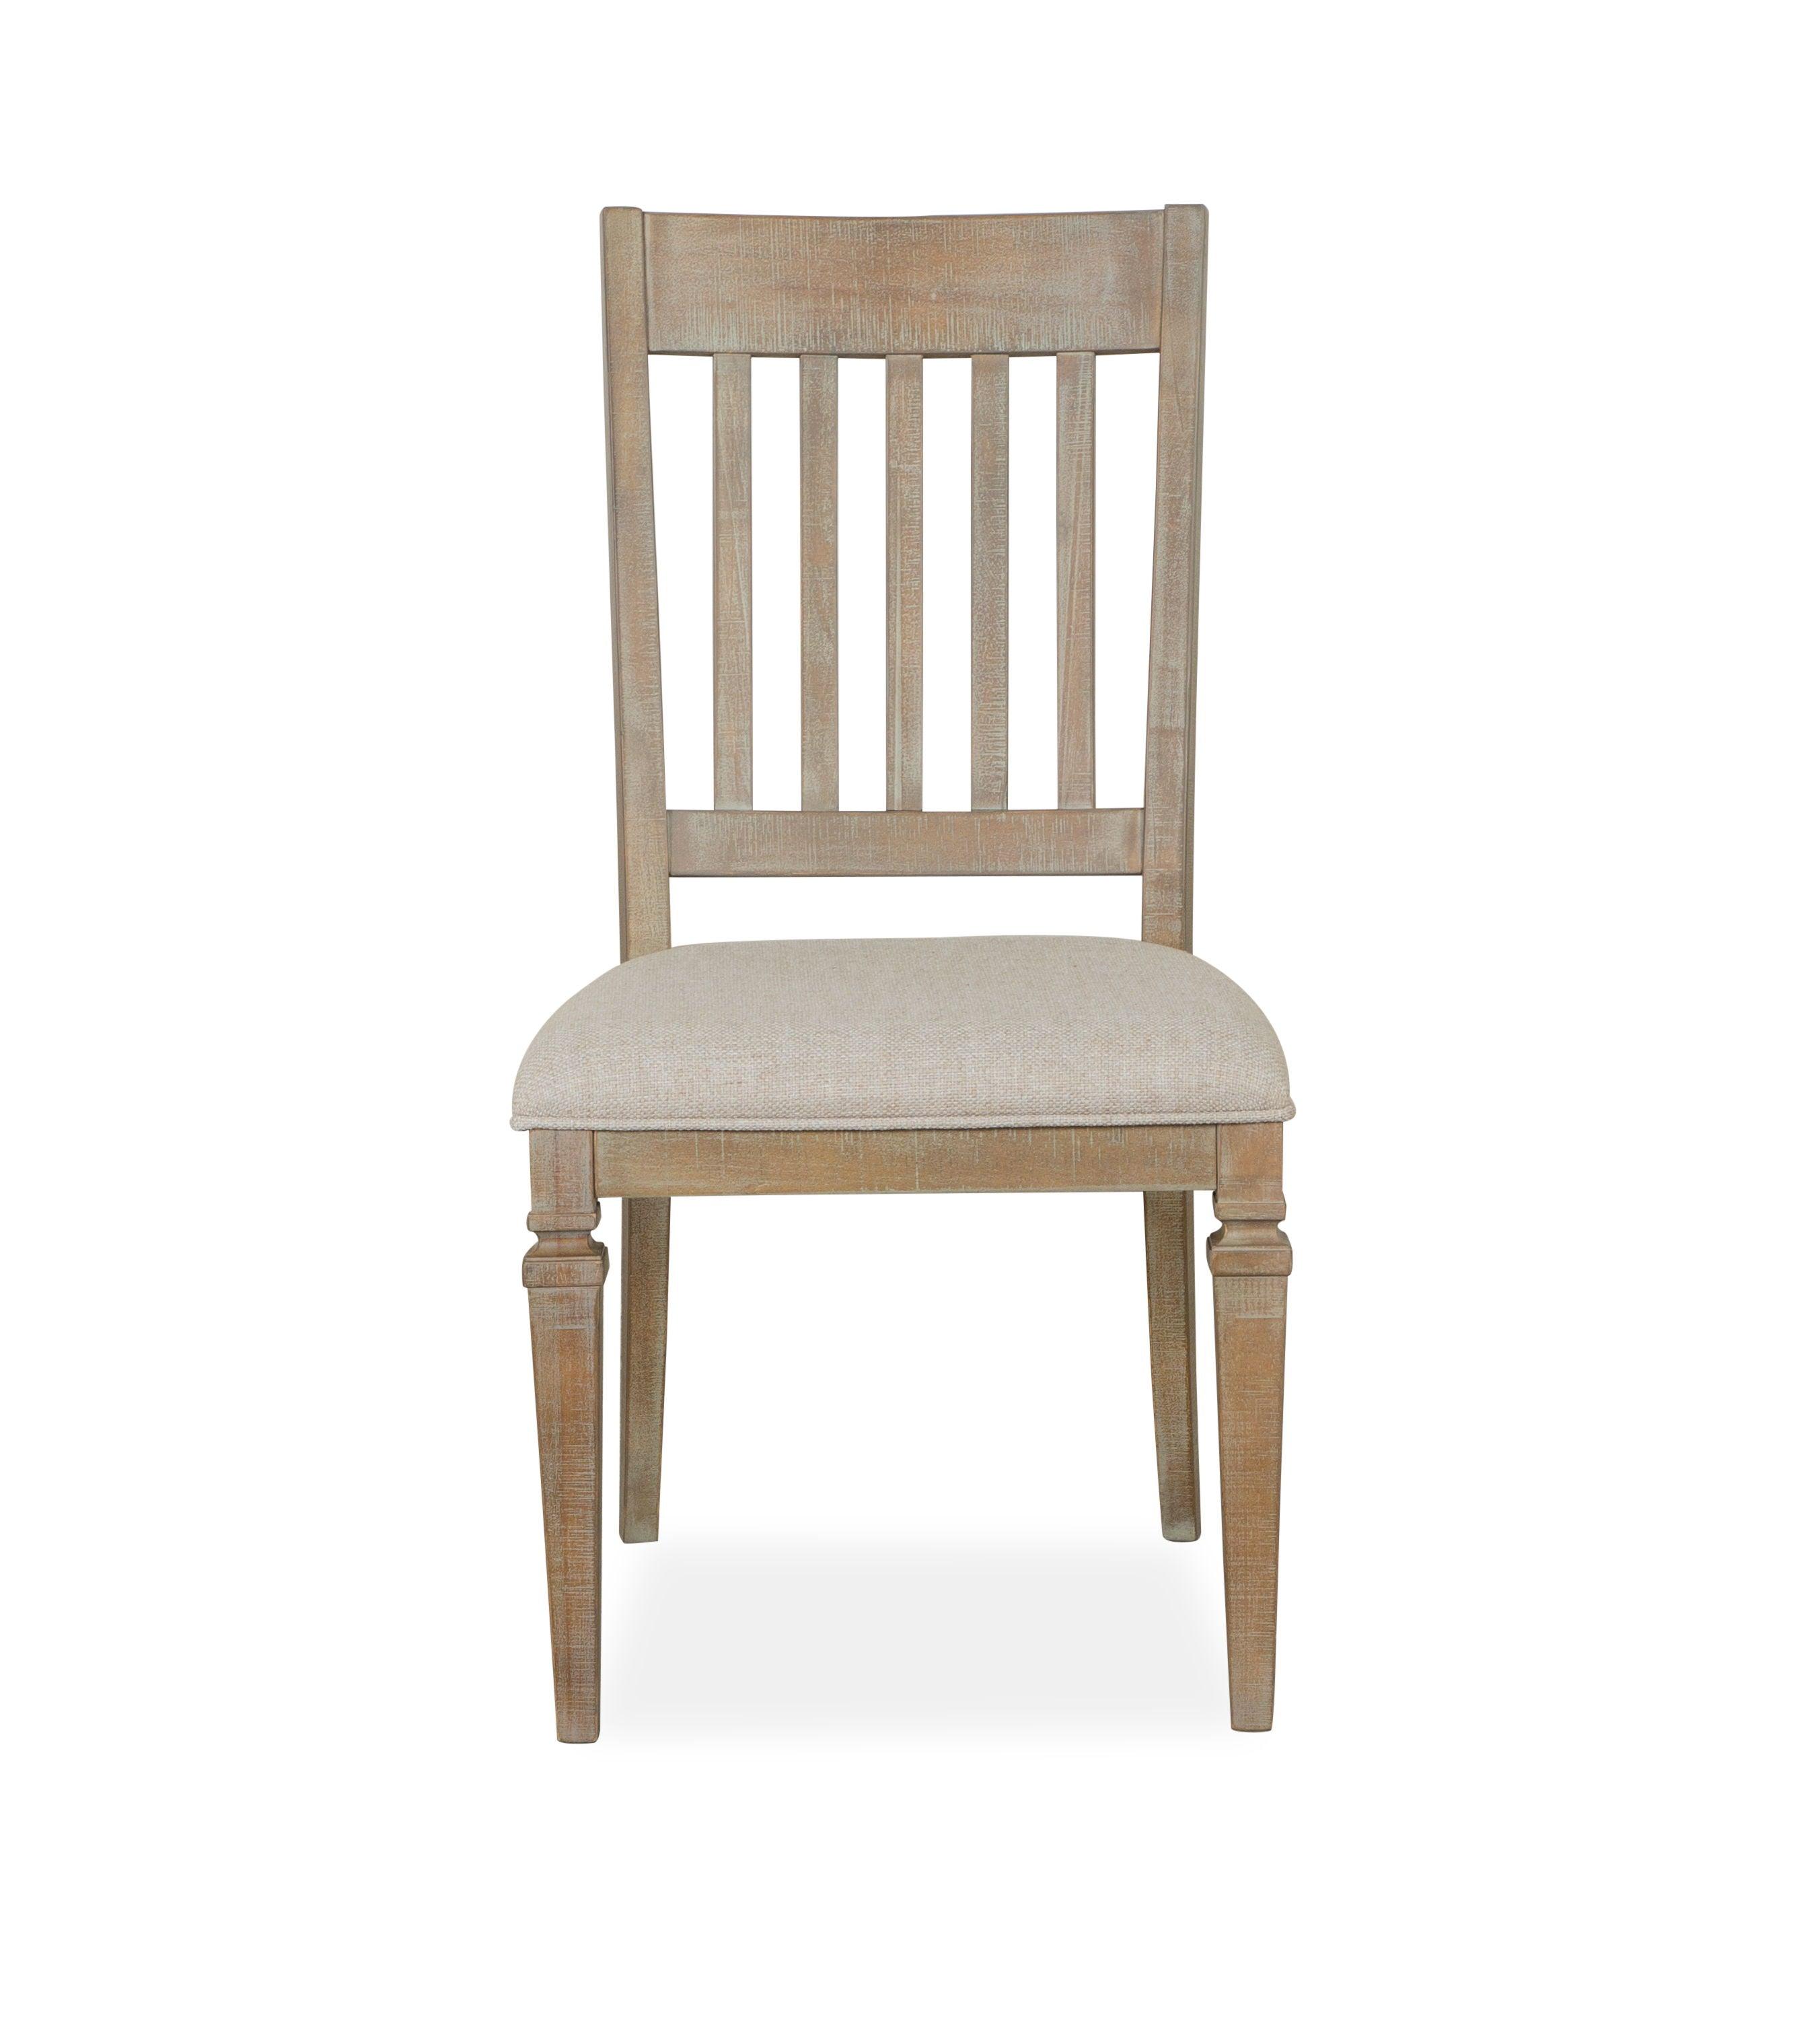 Magnussen Furniture - Lancaster - Dining Side Chair With Upholstered Seat (Set of 2) - Dovetail Grey - 5th Avenue Furniture